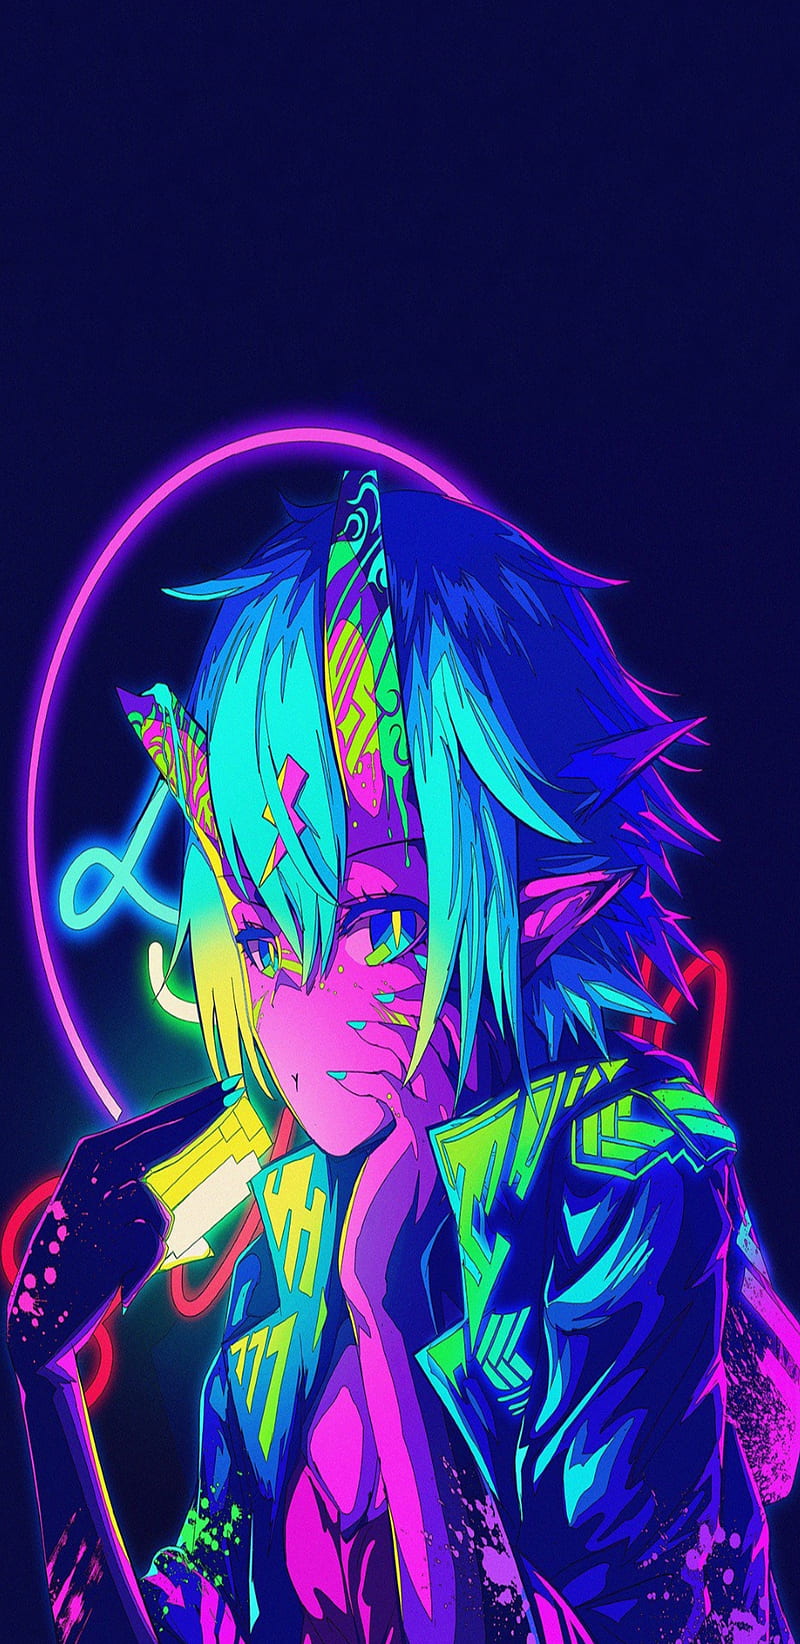 2 Trippy Anime Wallpapers for iPhone and Android by Jordan Chan